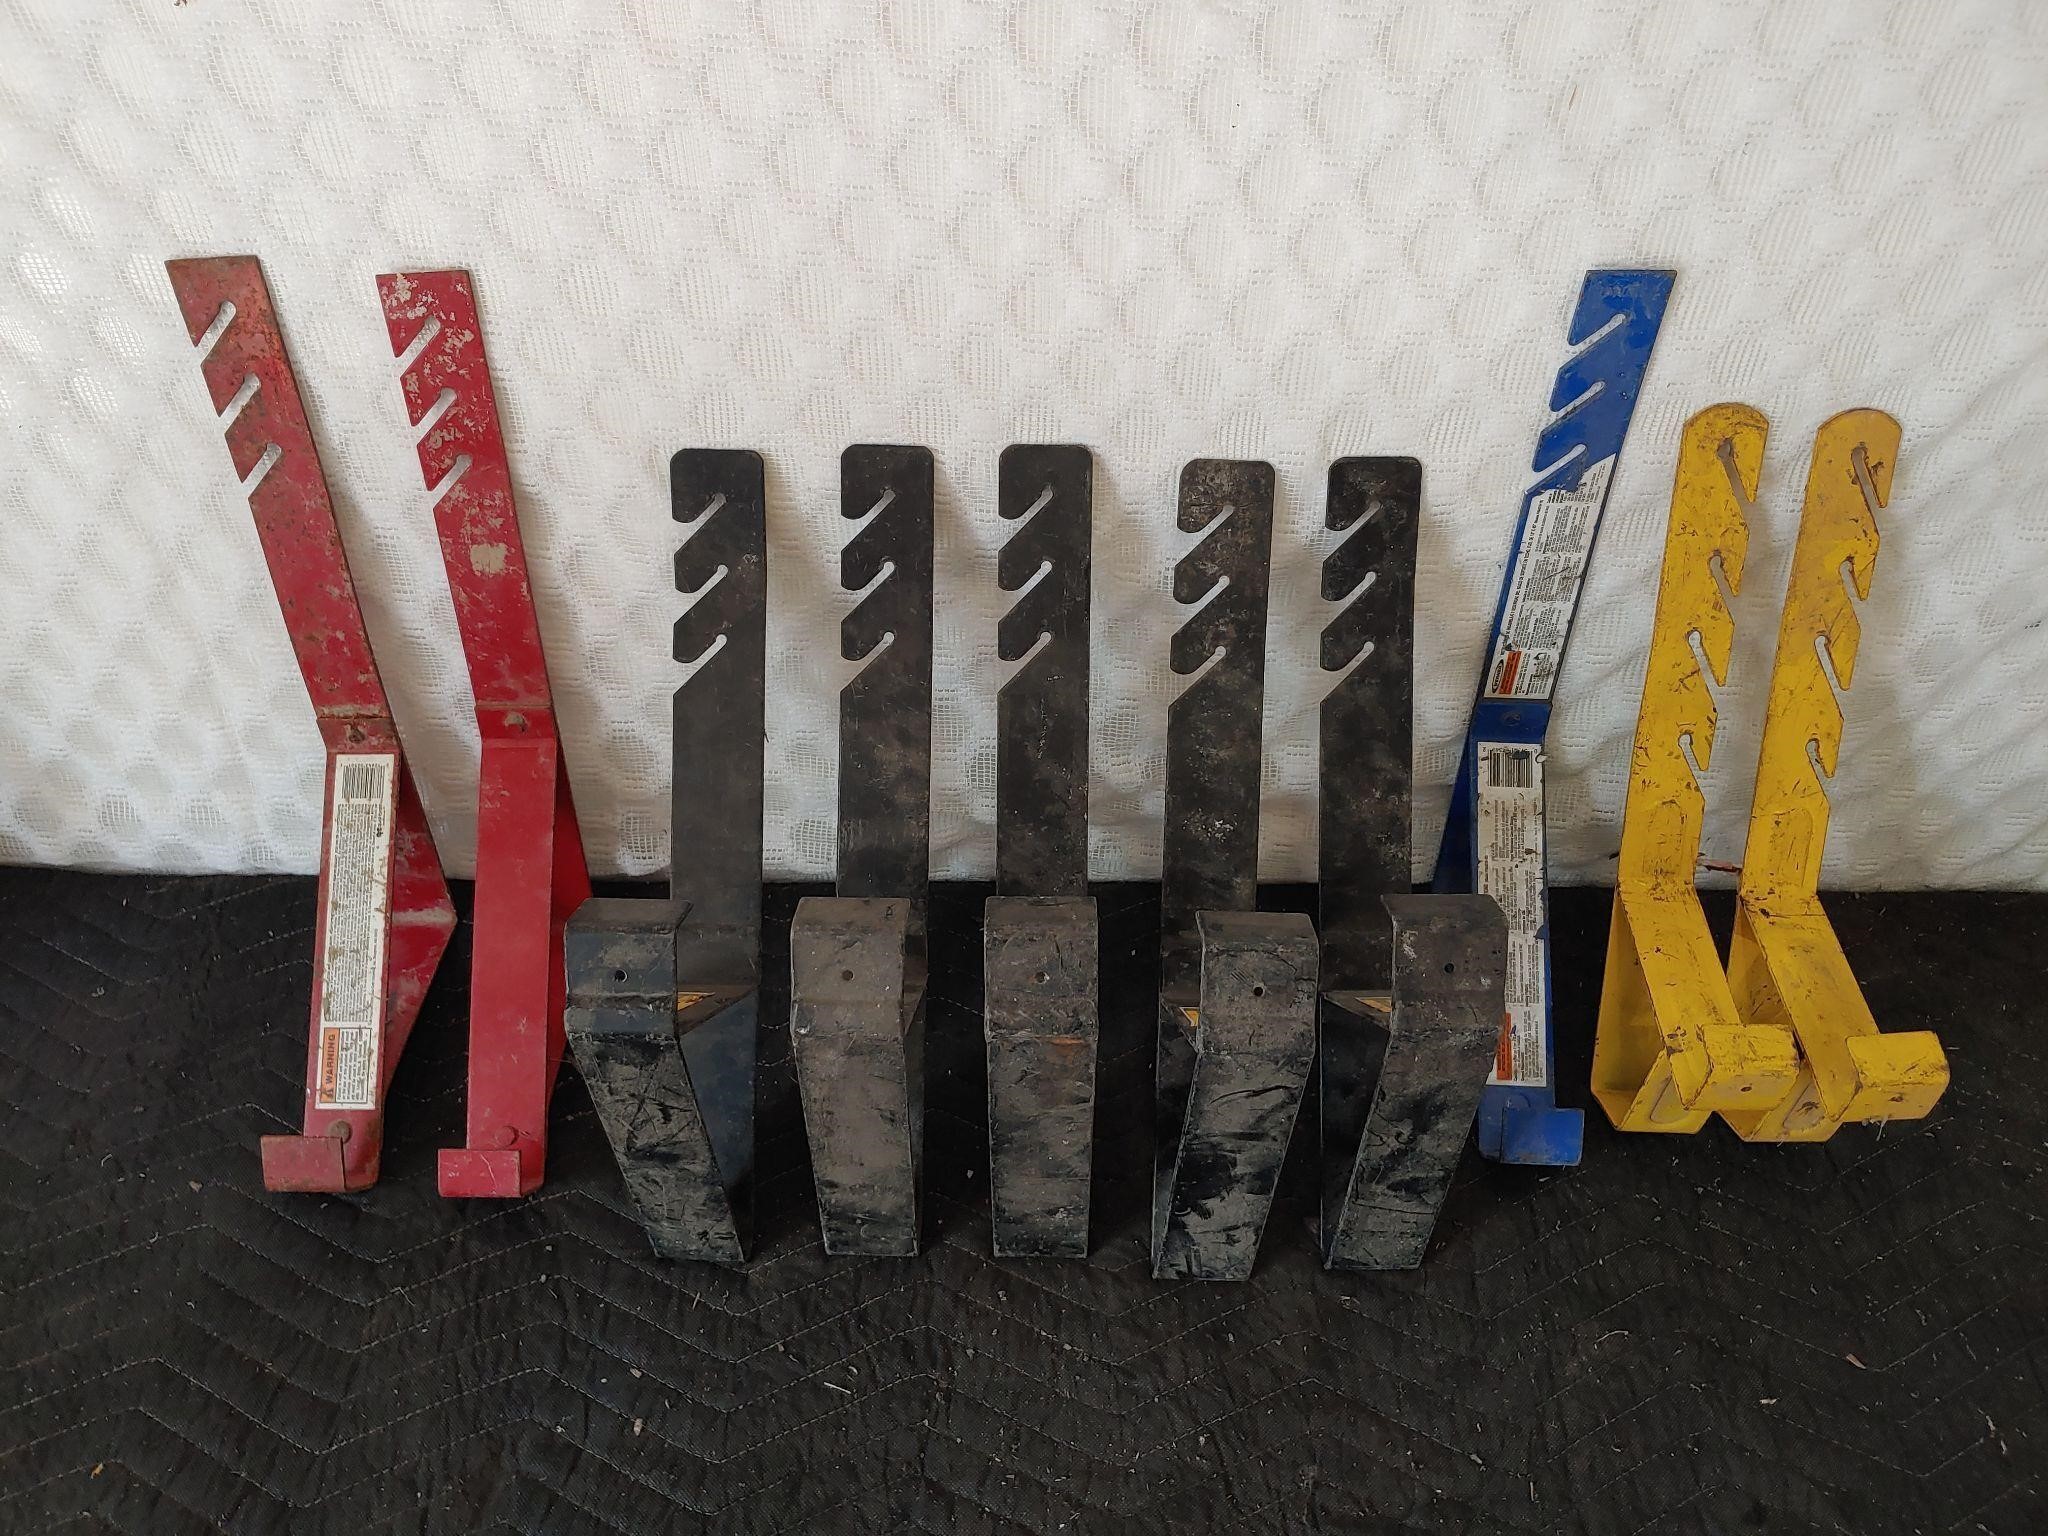 Roofing - Assortment of 10 Roofing Jacks